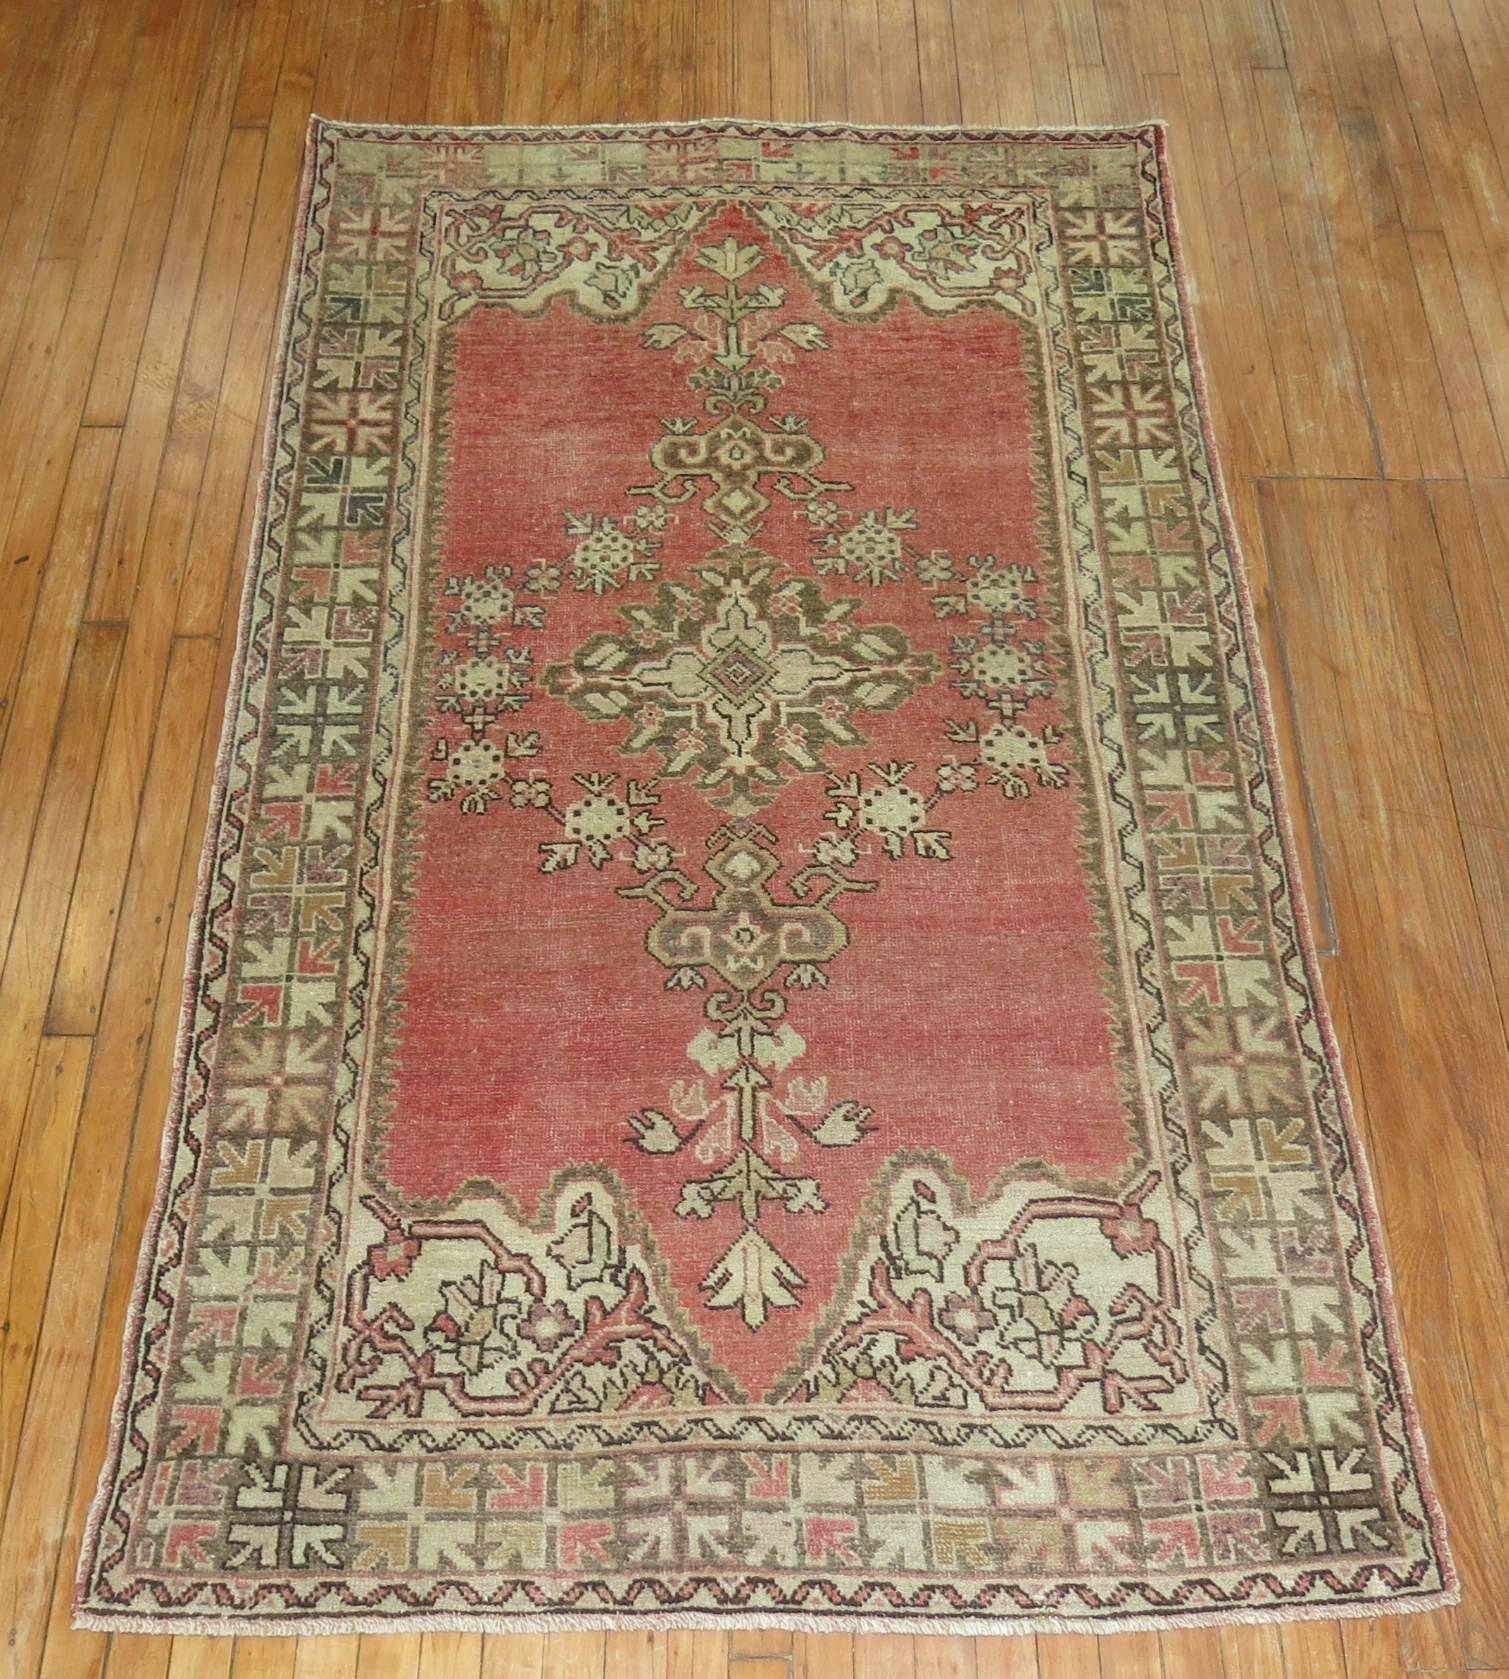 Vintage Turkish Oushak rug in soft reds, accents in brown and ivory.